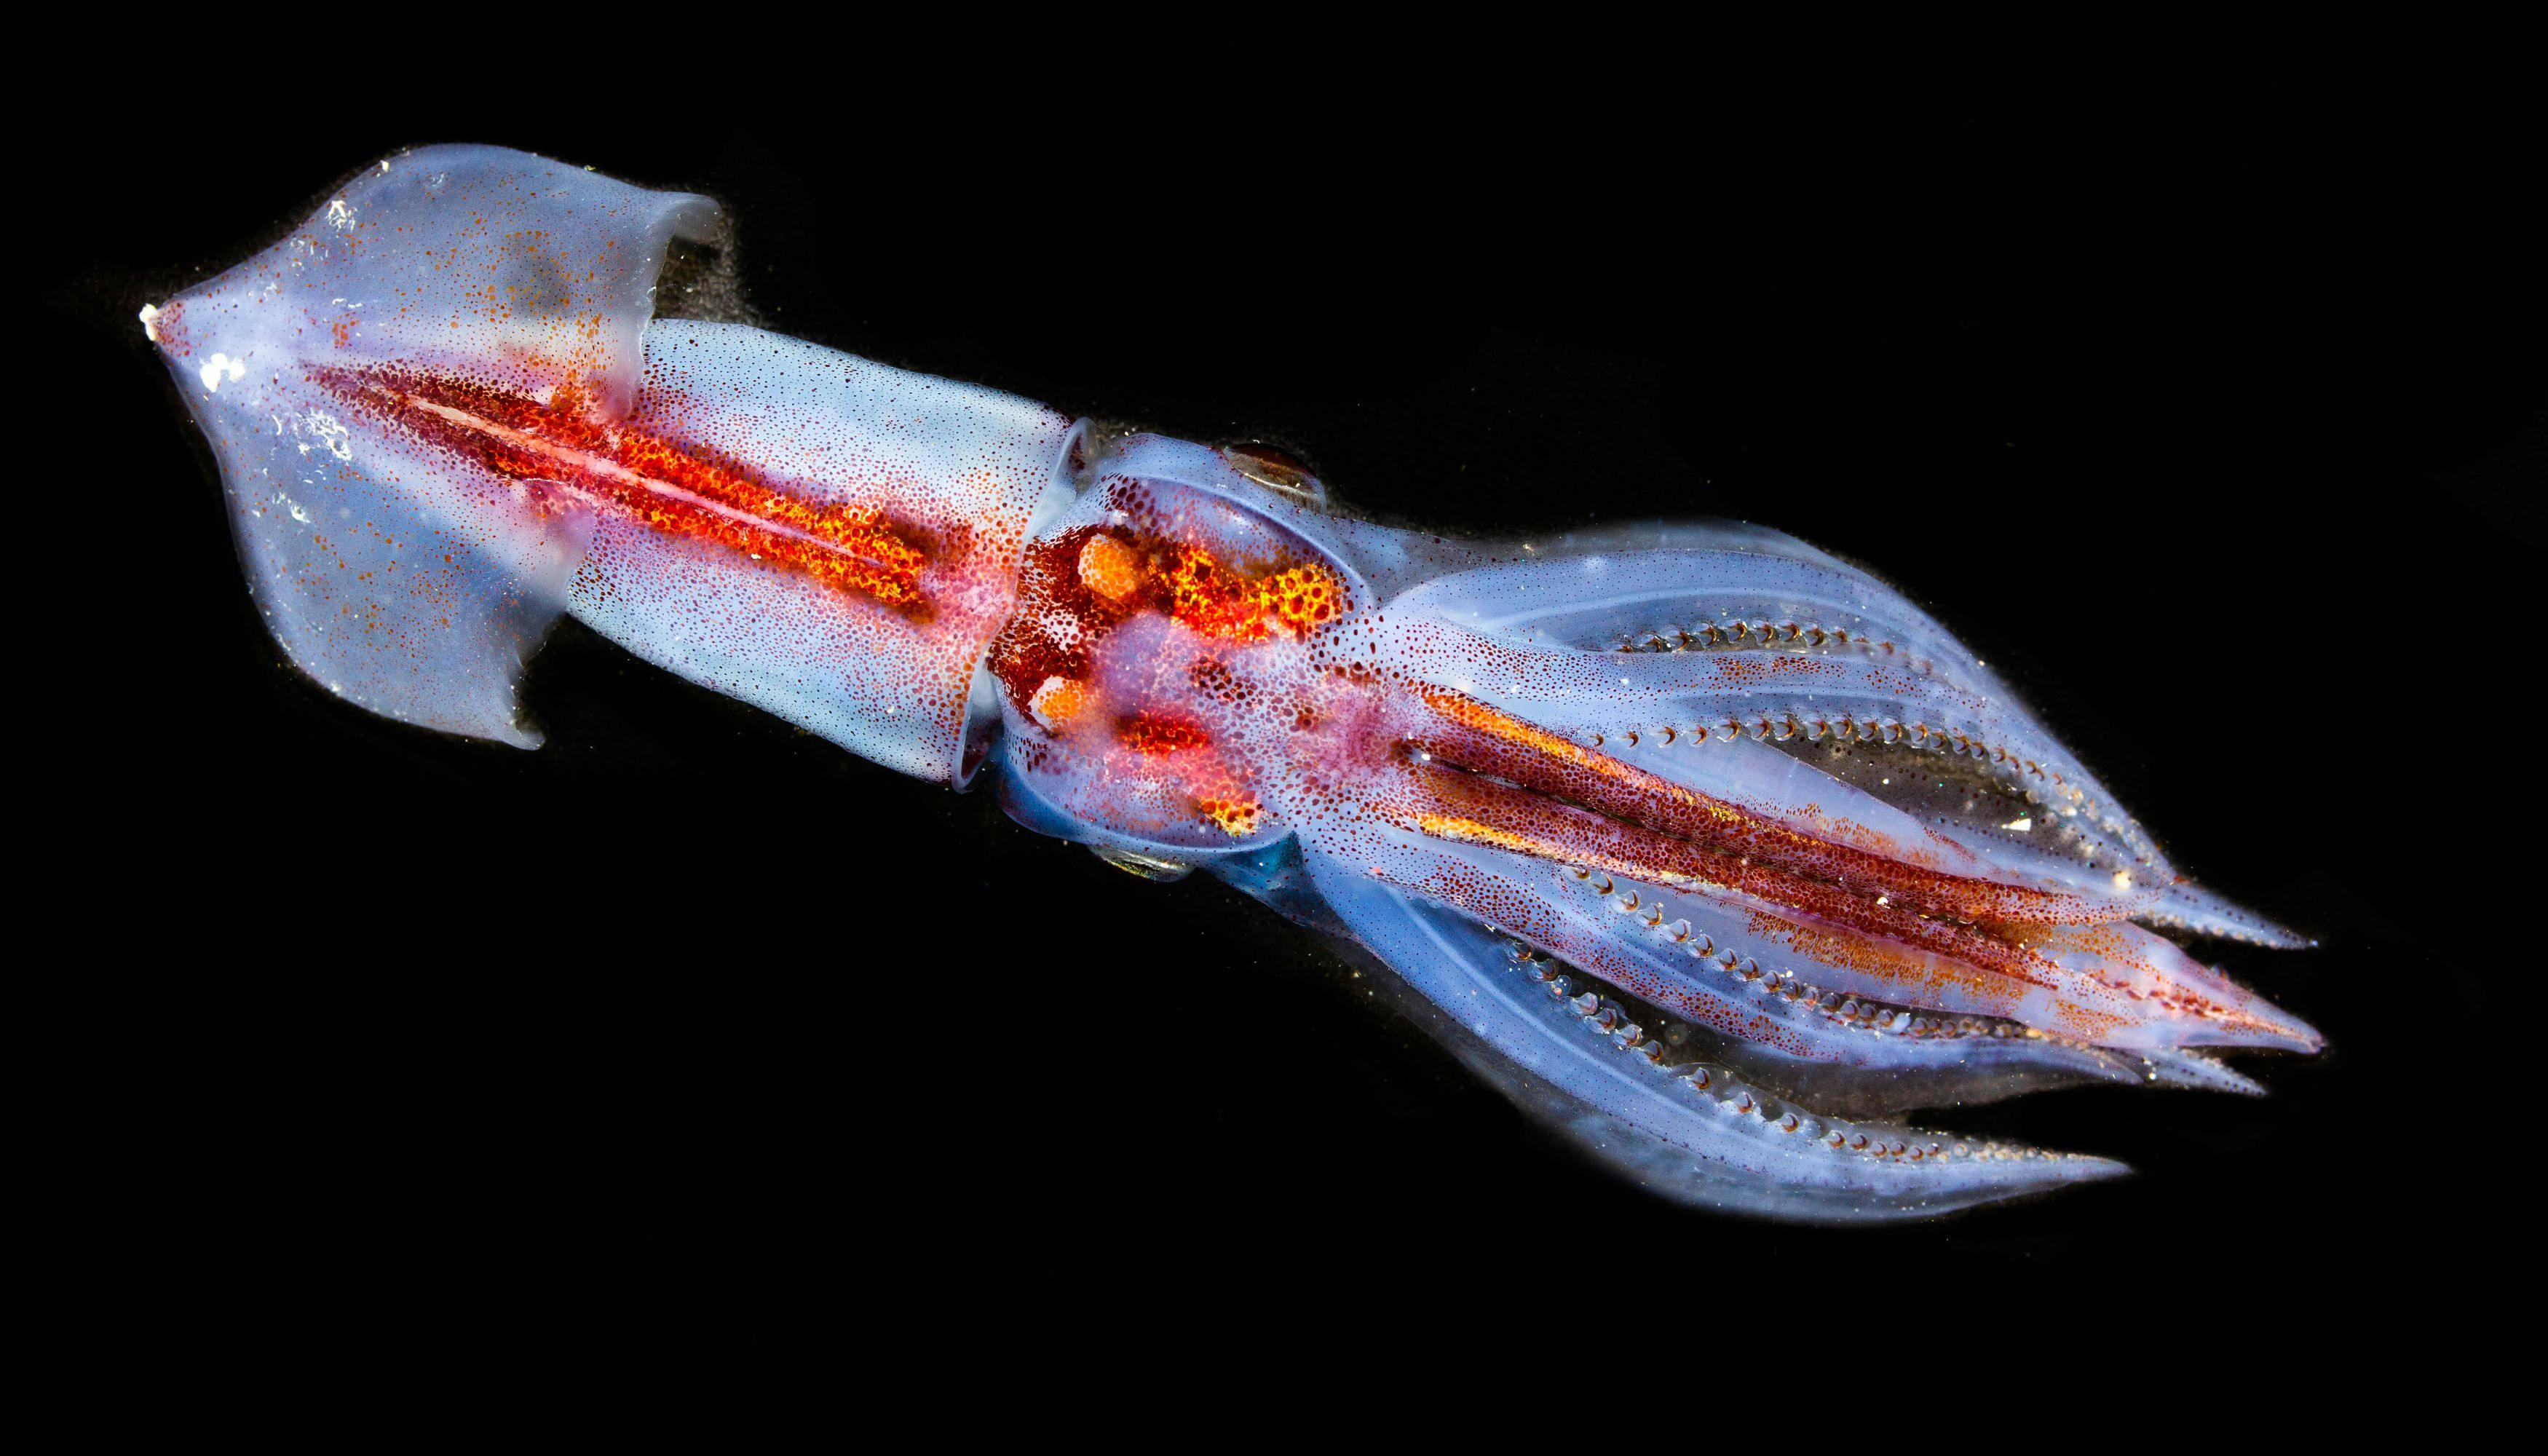 A squid on a black background